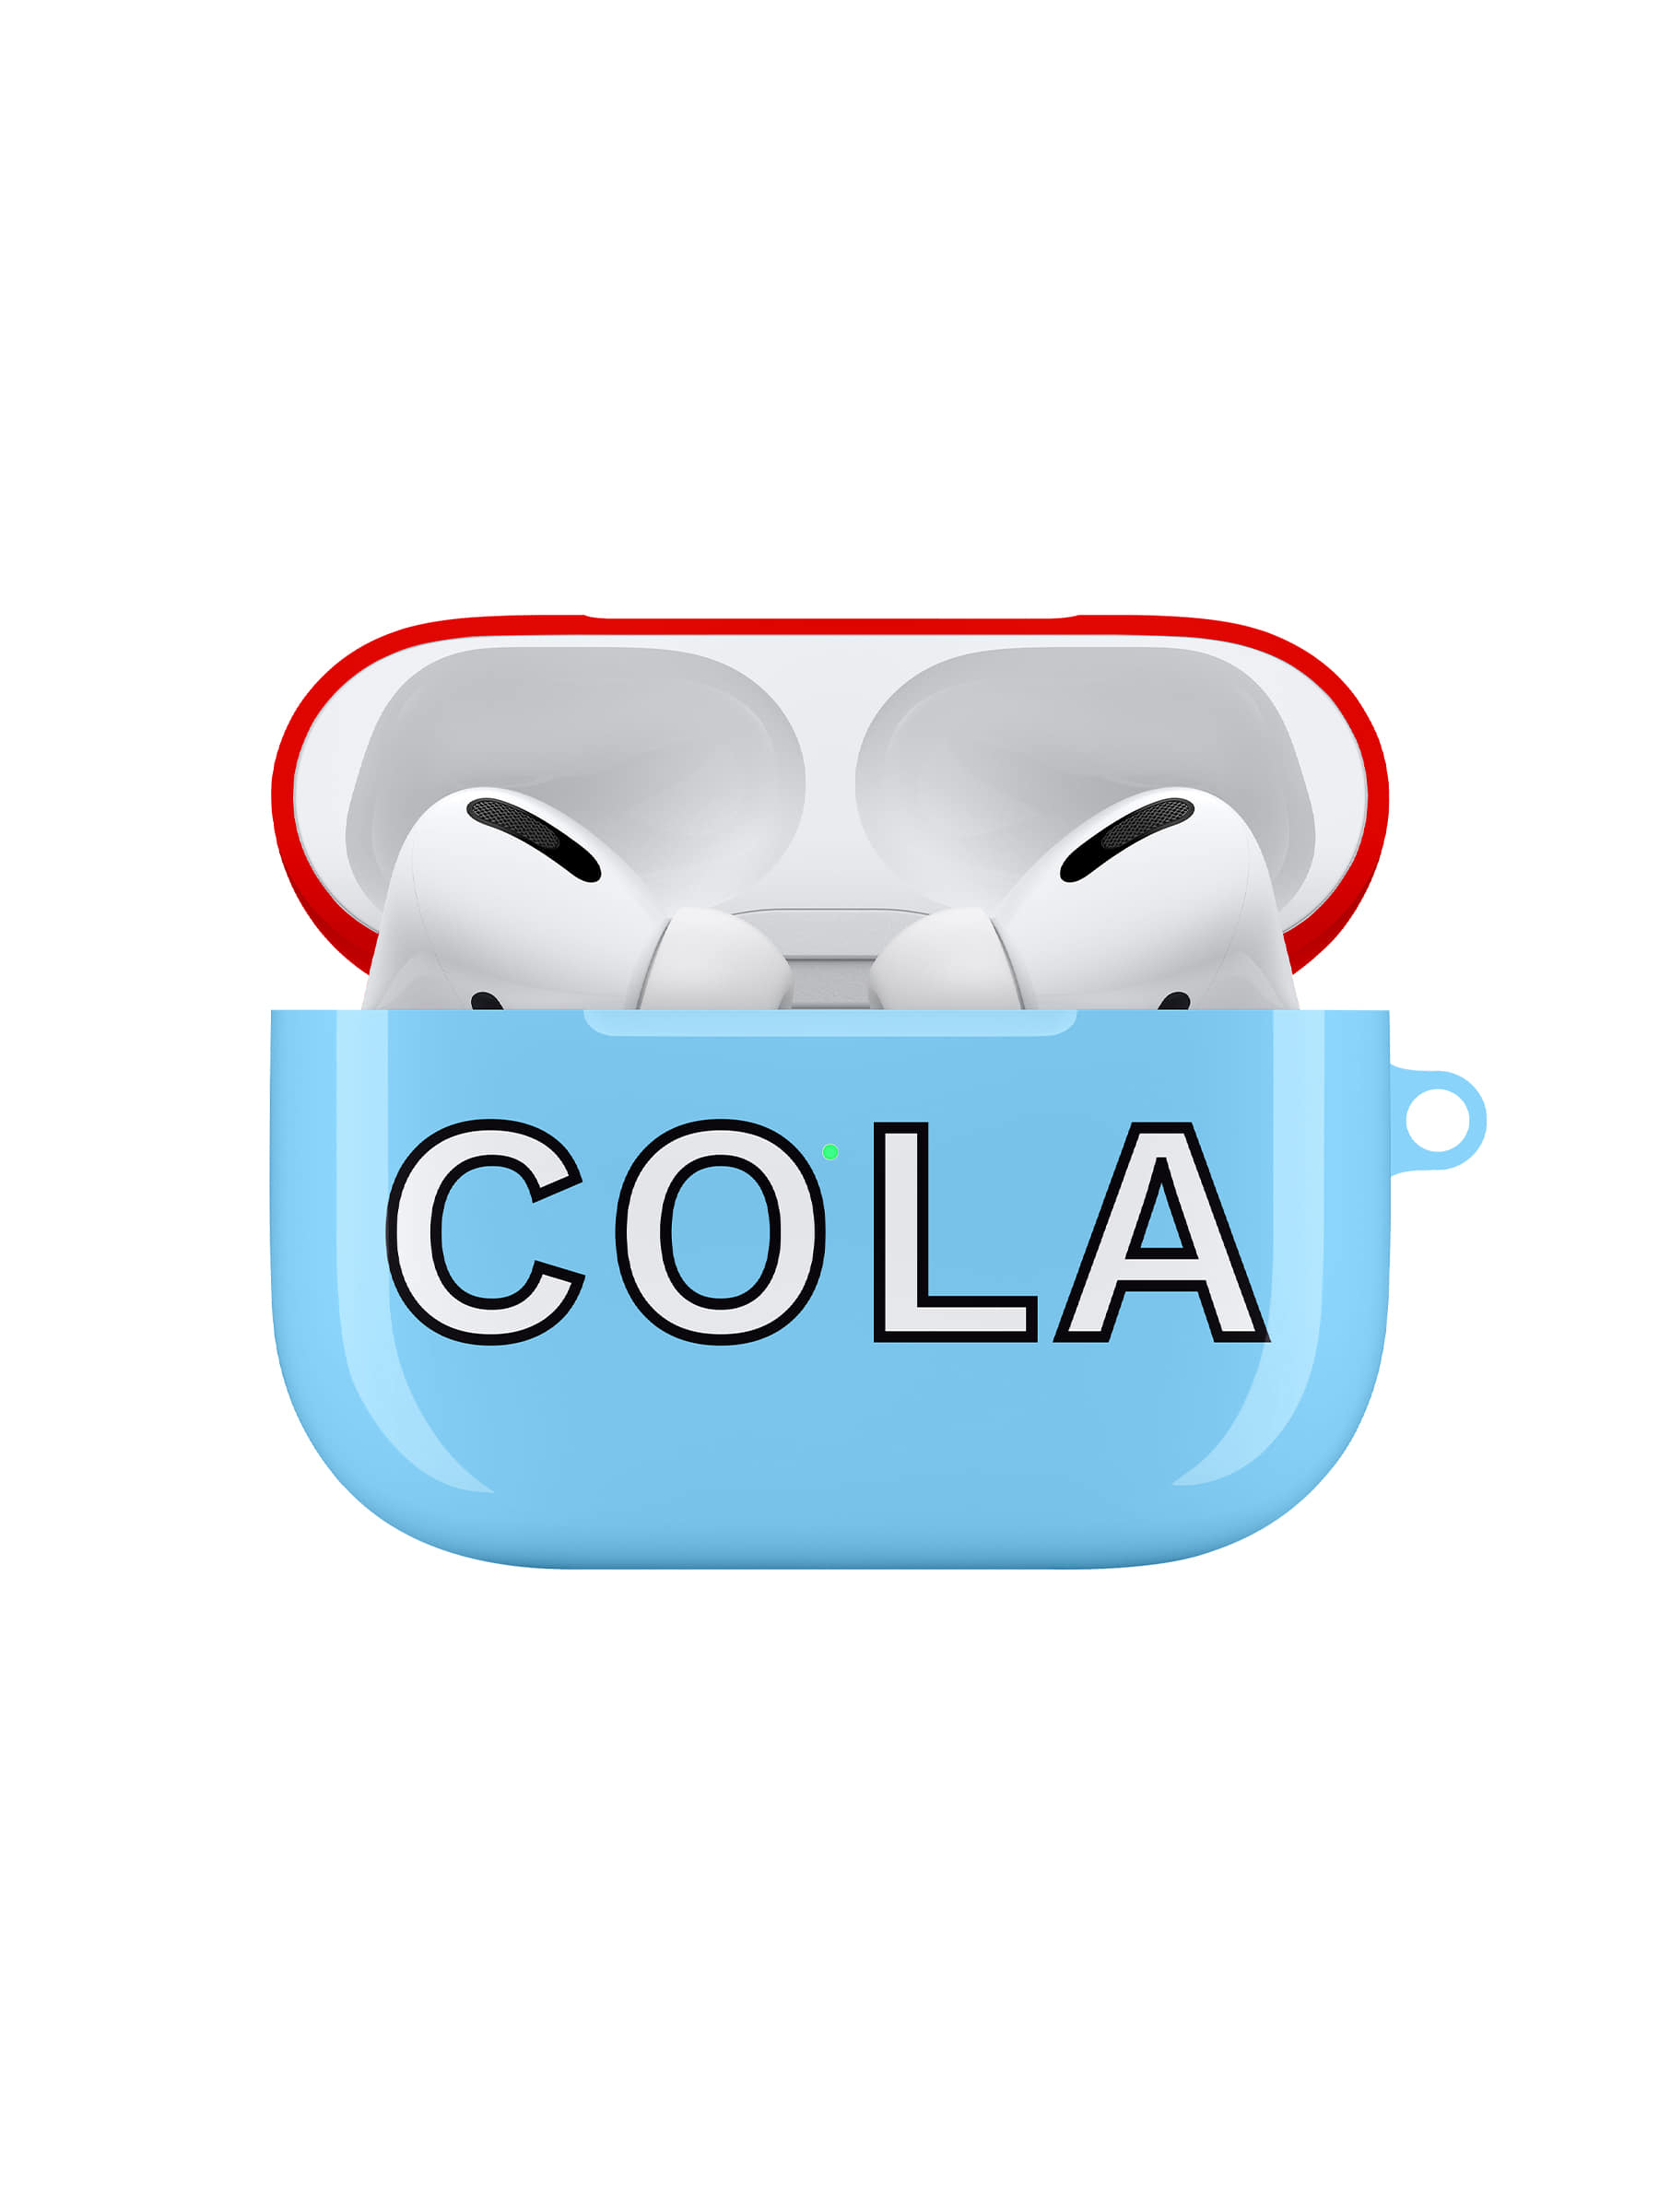 This is mine [Cola Cider : AirPods III &amp; Pro ]